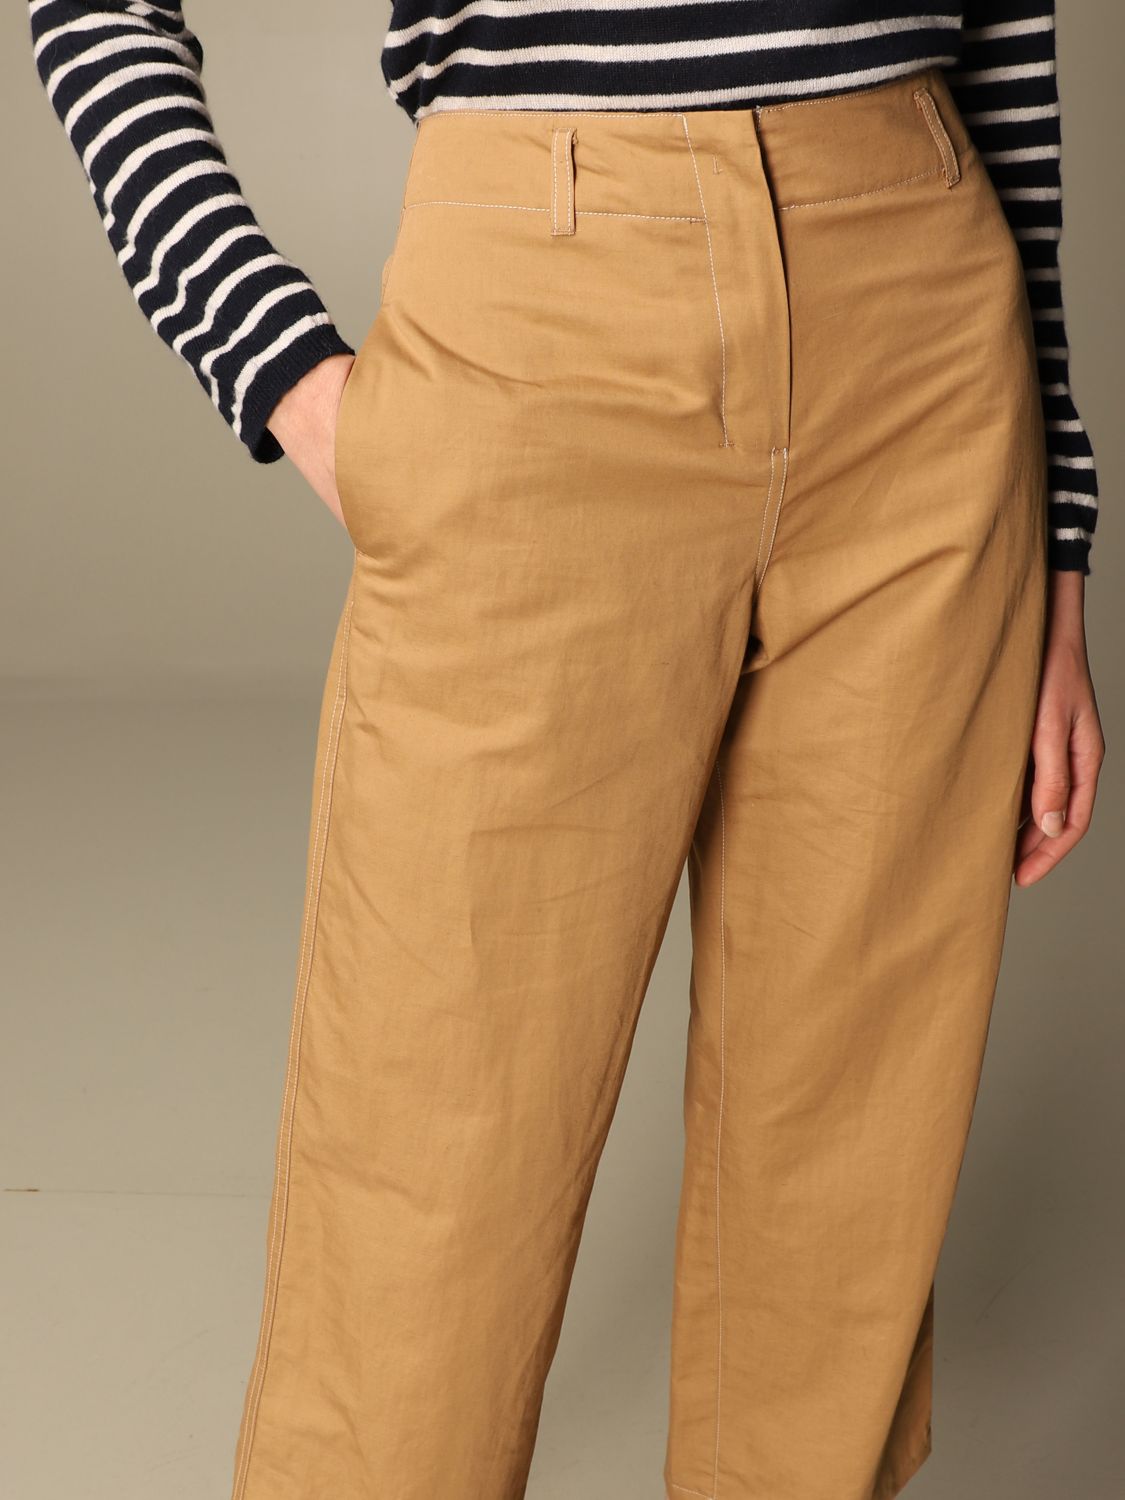 S Max Mara Outlet: Faesite trousers in cotton twill - Camel | Pants S ...